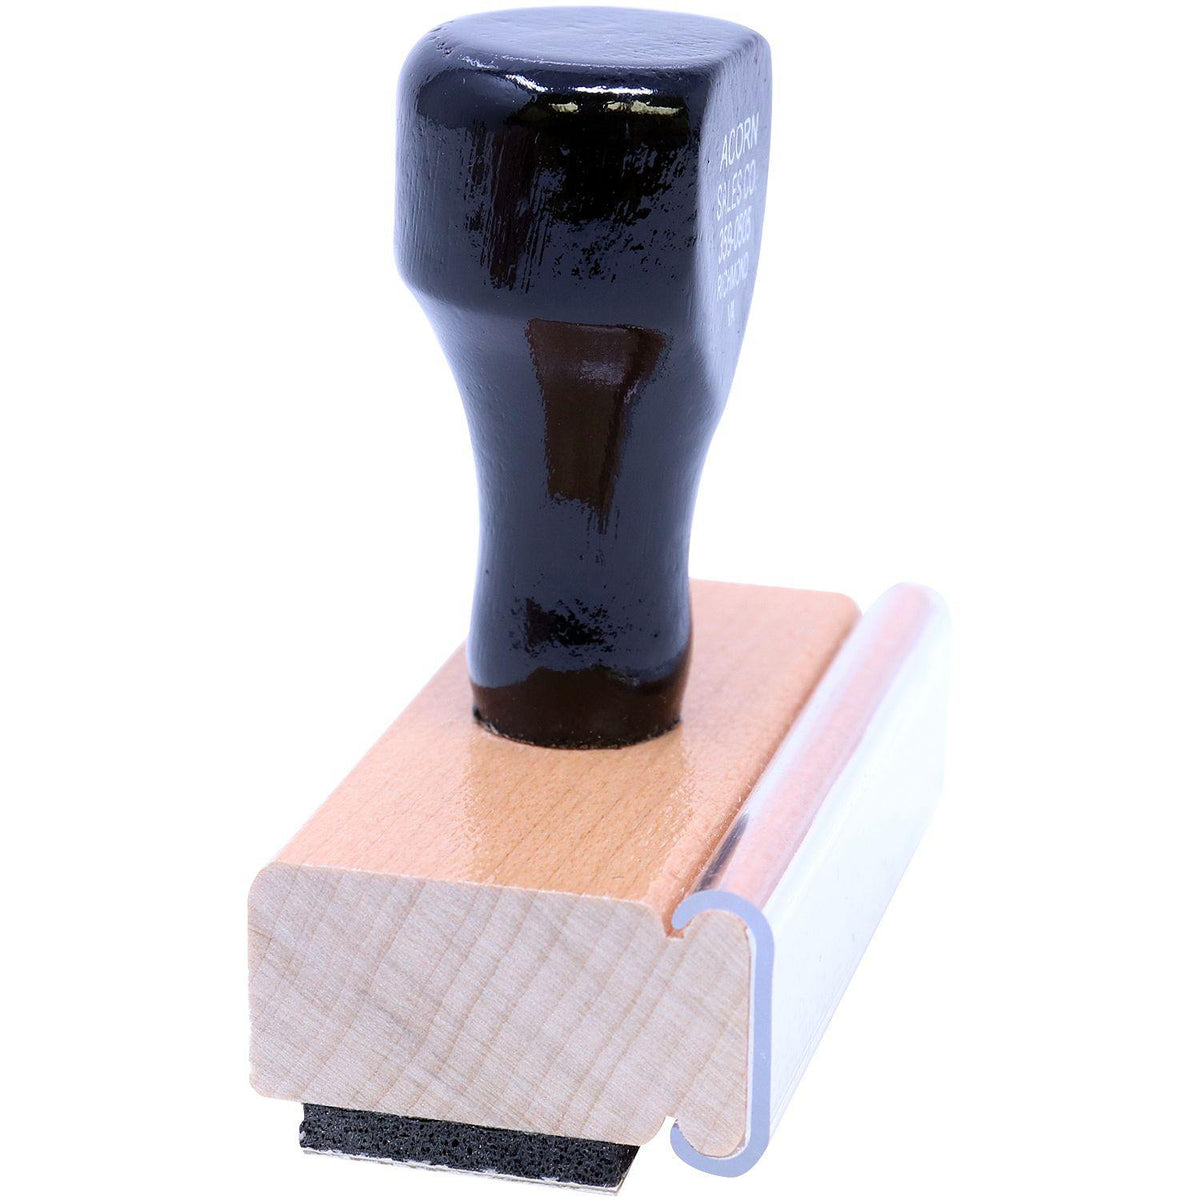 Lowercase For Deposit Only Rubber Stamp - Engineer Seal Stamps - Brand_Acorn, Impression Size_Small, Stamp Type_Regular Stamp, Type of Use_Business, Type of Use_Finance